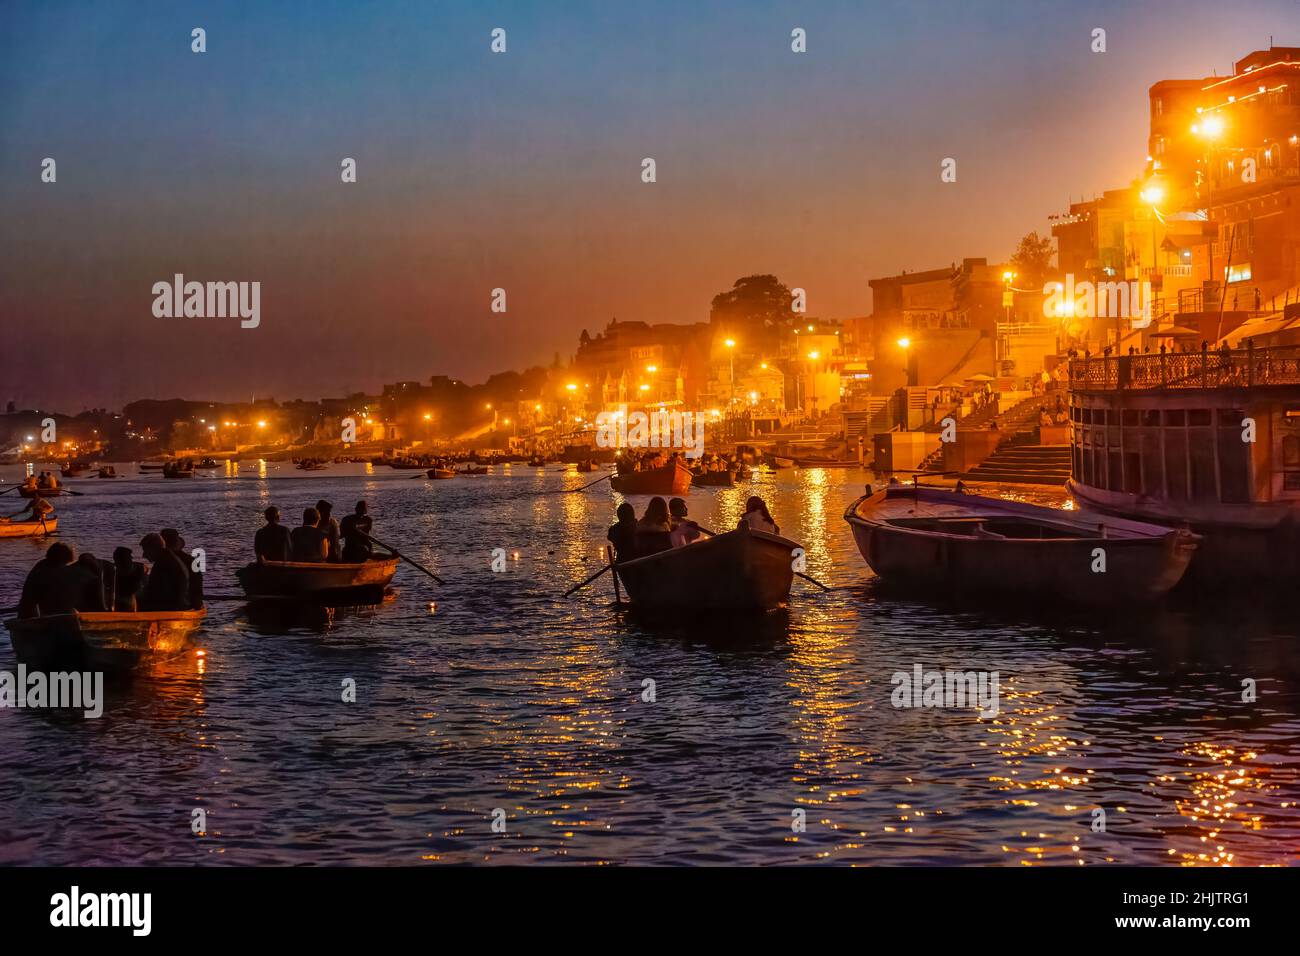 Rowing boats take tourists to the nightly aarti ceremony on the ghats on the River Ganges at Varanasi, a city in Uttar Pradesh, north India Stock Photo